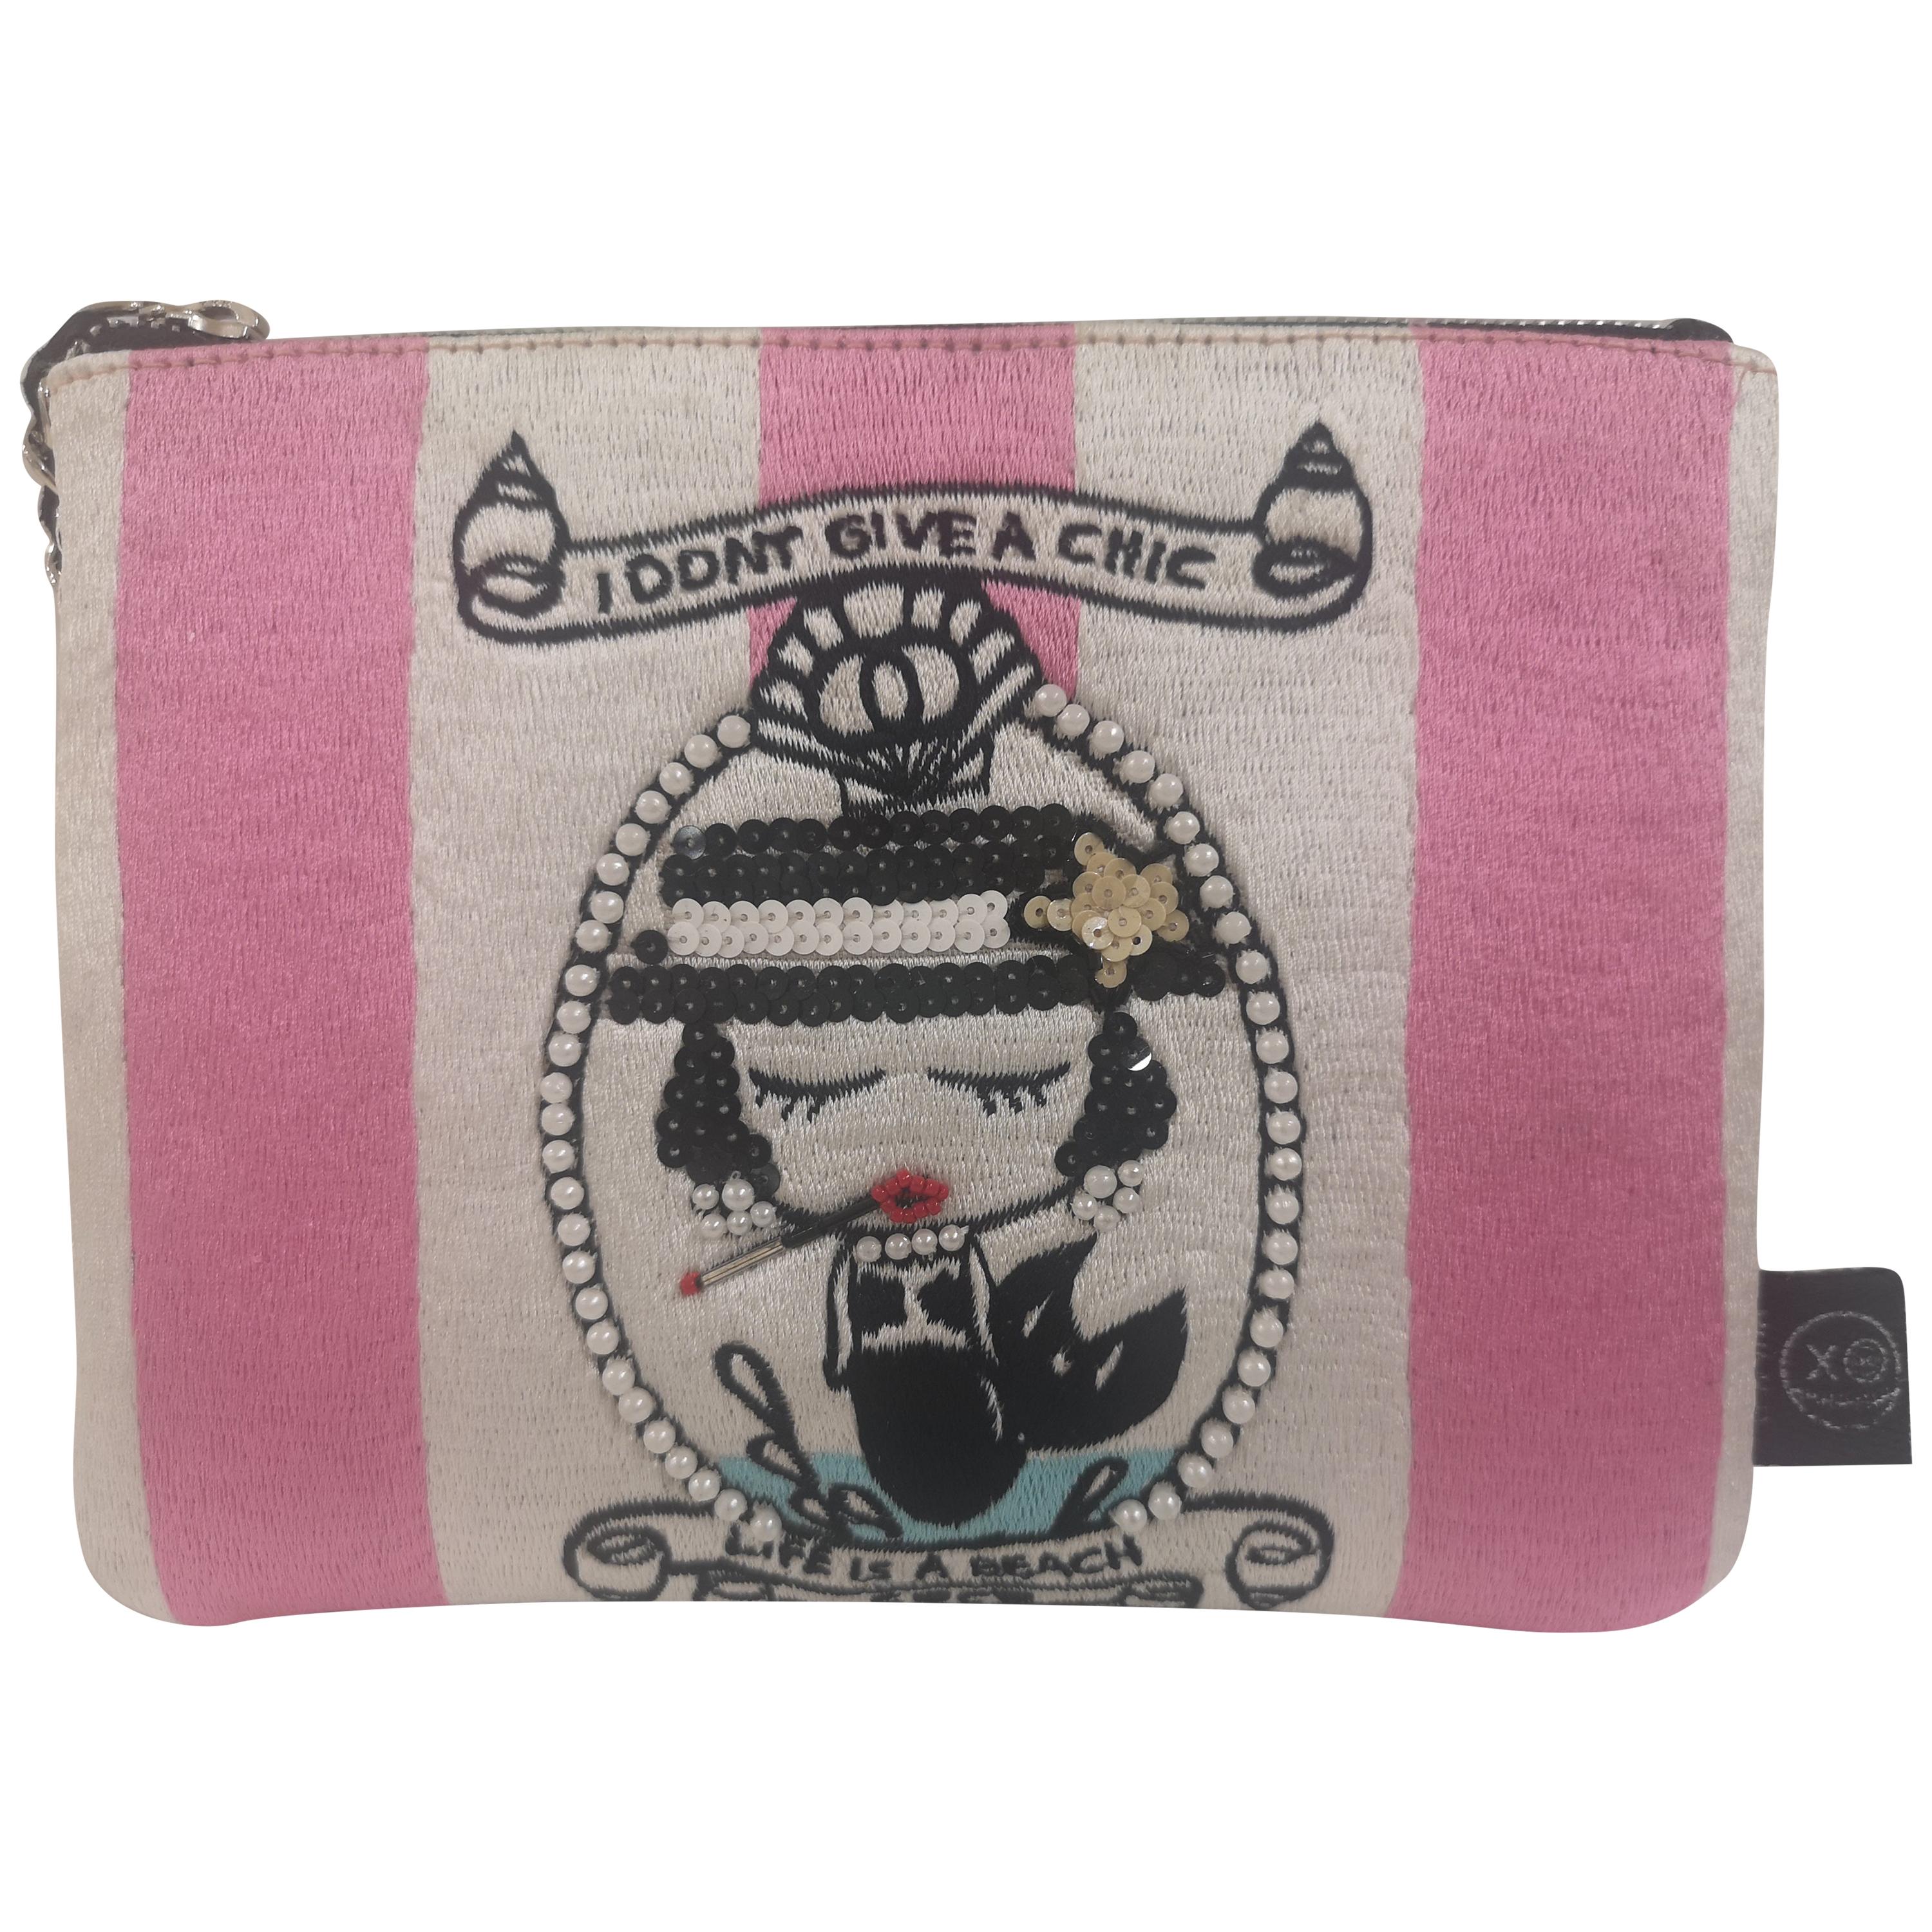 House of muamua i don't give a chic zip pochette